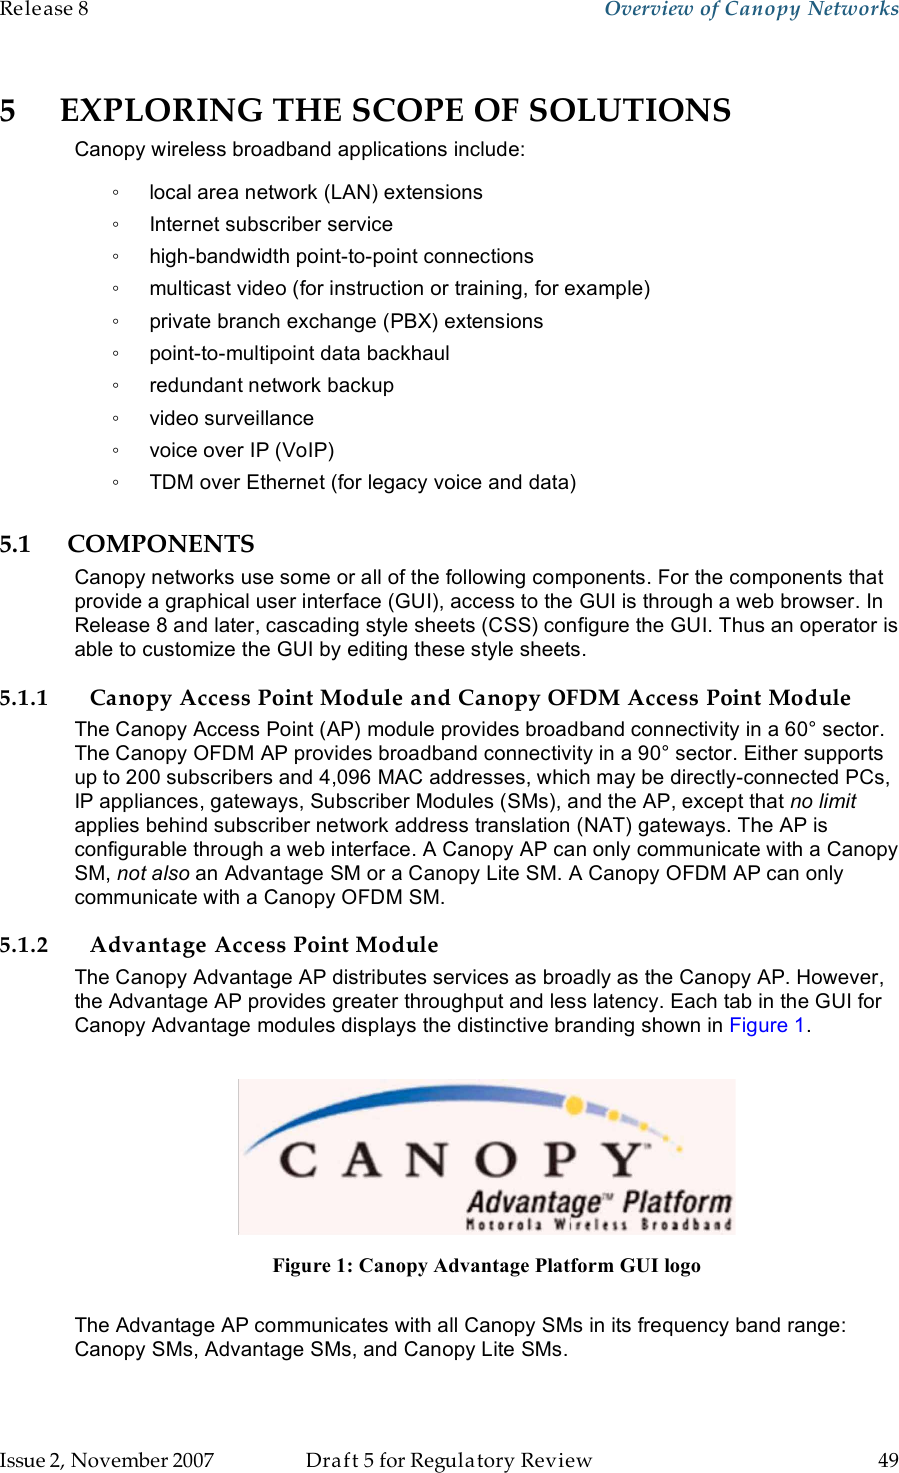 Release 8    Overview of Canopy Networks                  March 200                  Through Software Release 6.   Issue 2, November 2007  Draft 5 for Regulatory Review  49     5 EXPLORING THE SCOPE OF SOLUTIONS Canopy wireless broadband applications include: ◦  local area network (LAN) extensions ◦  Internet subscriber service ◦  high-bandwidth point-to-point connections ◦  multicast video (for instruction or training, for example) ◦  private branch exchange (PBX) extensions ◦  point-to-multipoint data backhaul ◦  redundant network backup ◦  video surveillance ◦  voice over IP (VoIP) ◦  TDM over Ethernet (for legacy voice and data) 5.1 COMPONENTS Canopy networks use some or all of the following components. For the components that provide a graphical user interface (GUI), access to the GUI is through a web browser. In Release 8 and later, cascading style sheets (CSS) configure the GUI. Thus an operator is able to customize the GUI by editing these style sheets. 5.1.1 Canopy Access Point Module and Canopy OFDM Access Point Module The Canopy Access Point (AP) module provides broadband connectivity in a 60° sector. The Canopy OFDM AP provides broadband connectivity in a 90° sector. Either supports up to 200 subscribers and 4,096 MAC addresses, which may be directly-connected PCs, IP appliances, gateways, Subscriber Modules (SMs), and the AP, except that no limit applies behind subscriber network address translation (NAT) gateways. The AP is configurable through a web interface. A Canopy AP can only communicate with a Canopy SM, not also an Advantage SM or a Canopy Lite SM. A Canopy OFDM AP can only communicate with a Canopy OFDM SM. 5.1.2 Advantage Access Point Module The Canopy Advantage AP distributes services as broadly as the Canopy AP. However, the Advantage AP provides greater throughput and less latency. Each tab in the GUI for Canopy Advantage modules displays the distinctive branding shown in Figure 1.   Figure 1: Canopy Advantage Platform GUI logo  The Advantage AP communicates with all Canopy SMs in its frequency band range: Canopy SMs, Advantage SMs, and Canopy Lite SMs.  